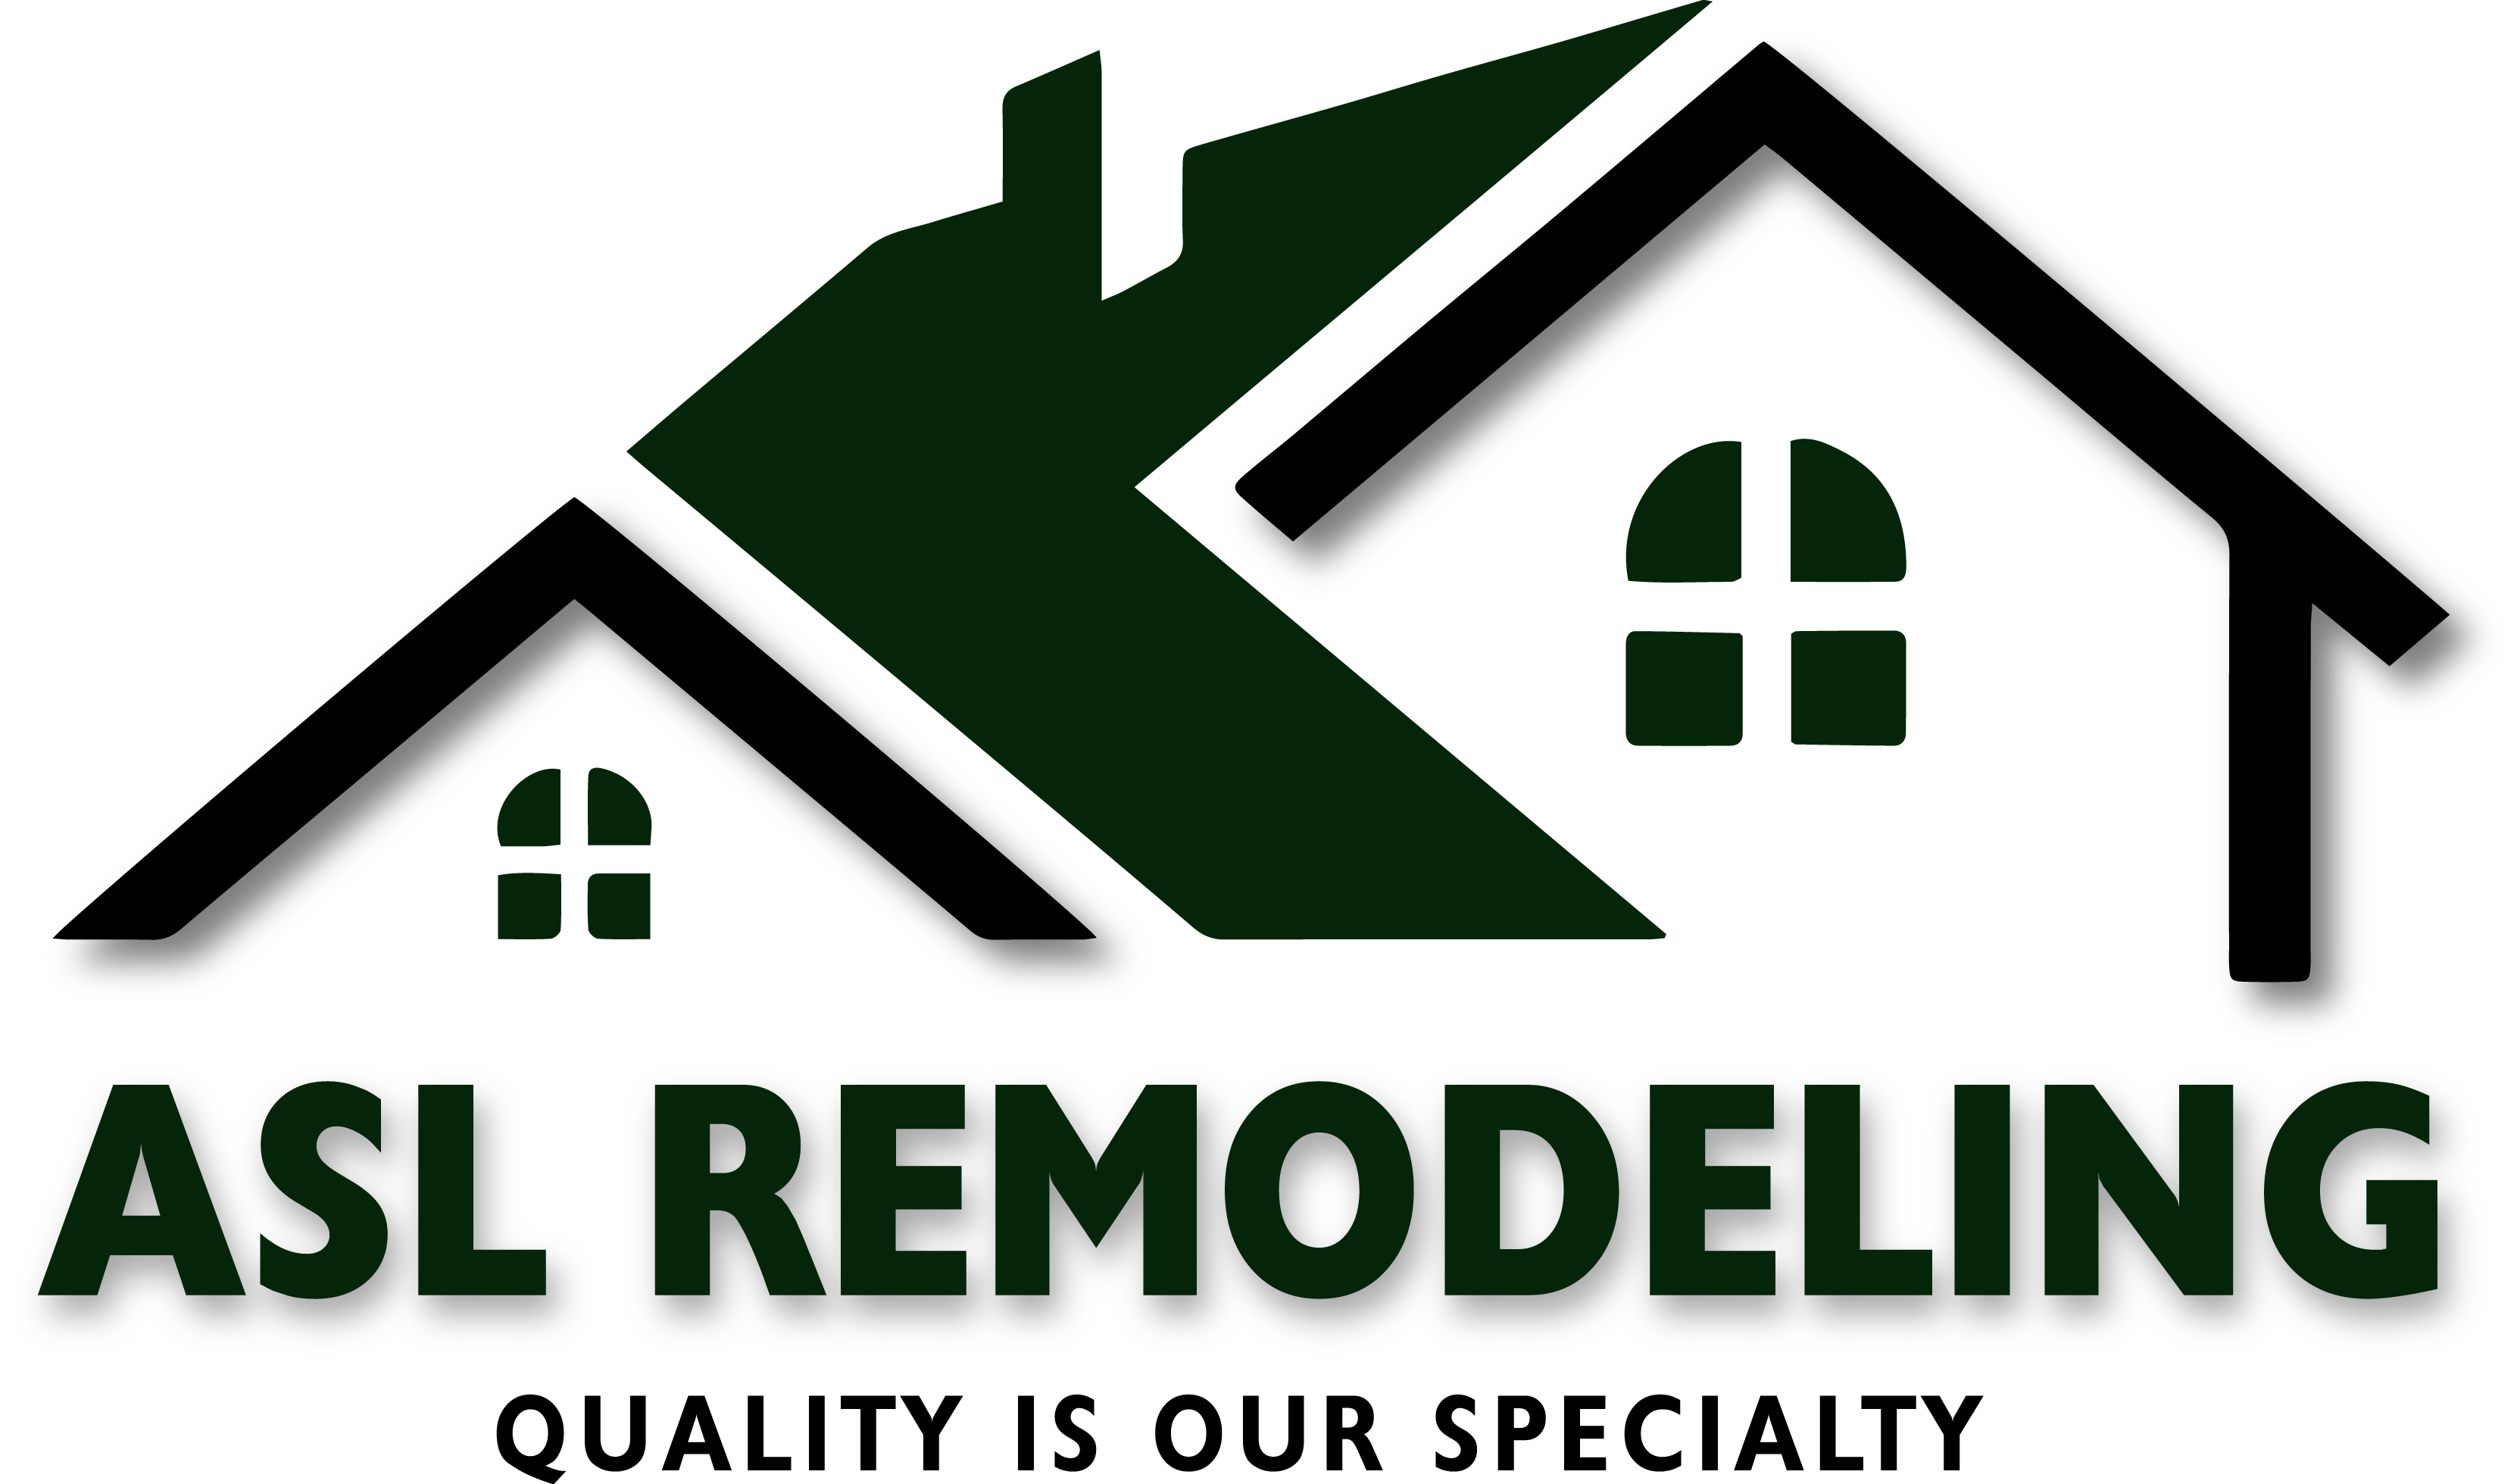 ASL Remodeling helps families renovate their kitchens to make them more convenient